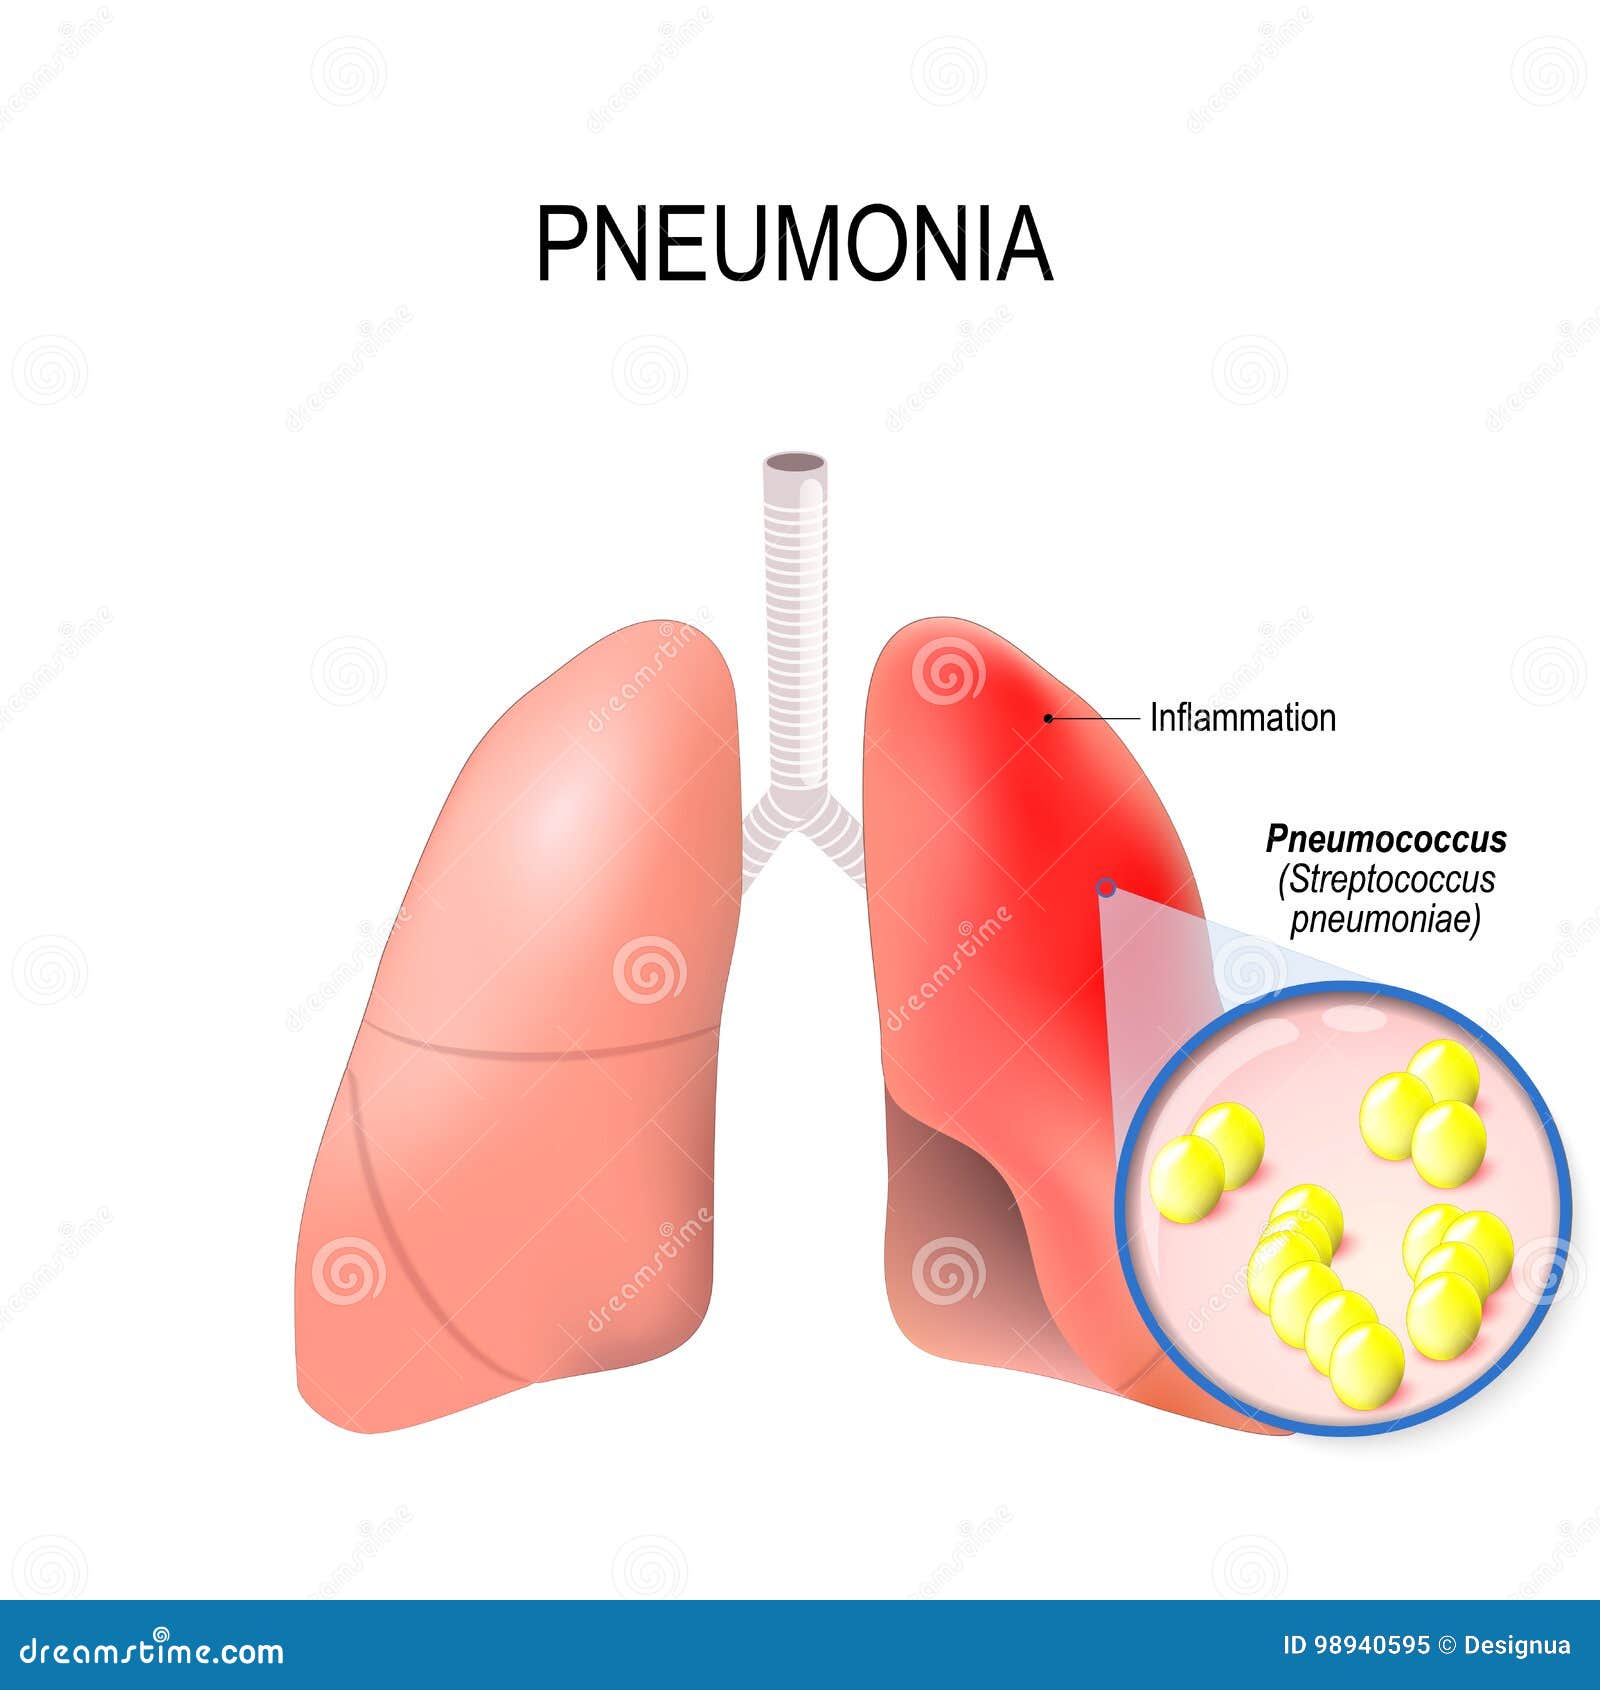 pneumonia. normal and inflammatory condition of the lung.